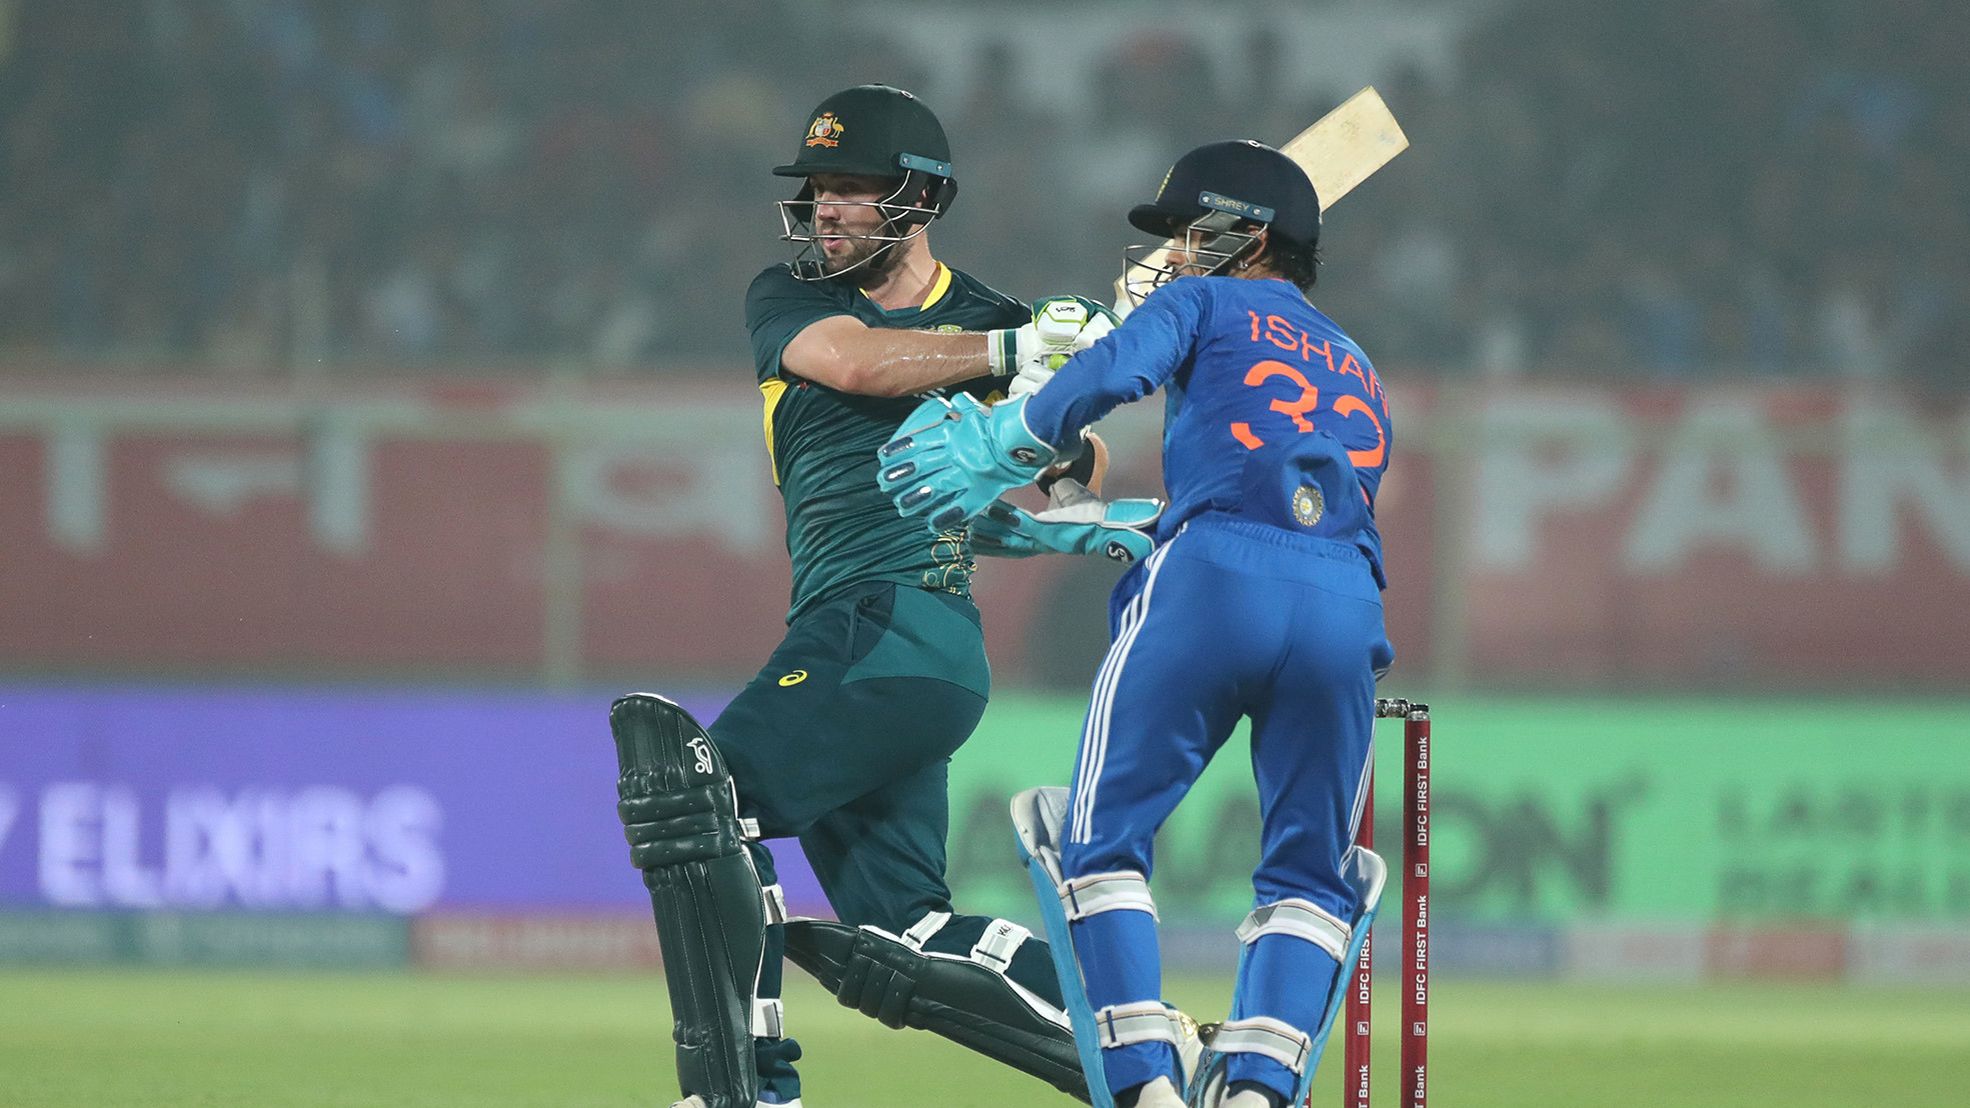 Aussie star Josh Inglis' blistering century can't stop India in last-ball thriller